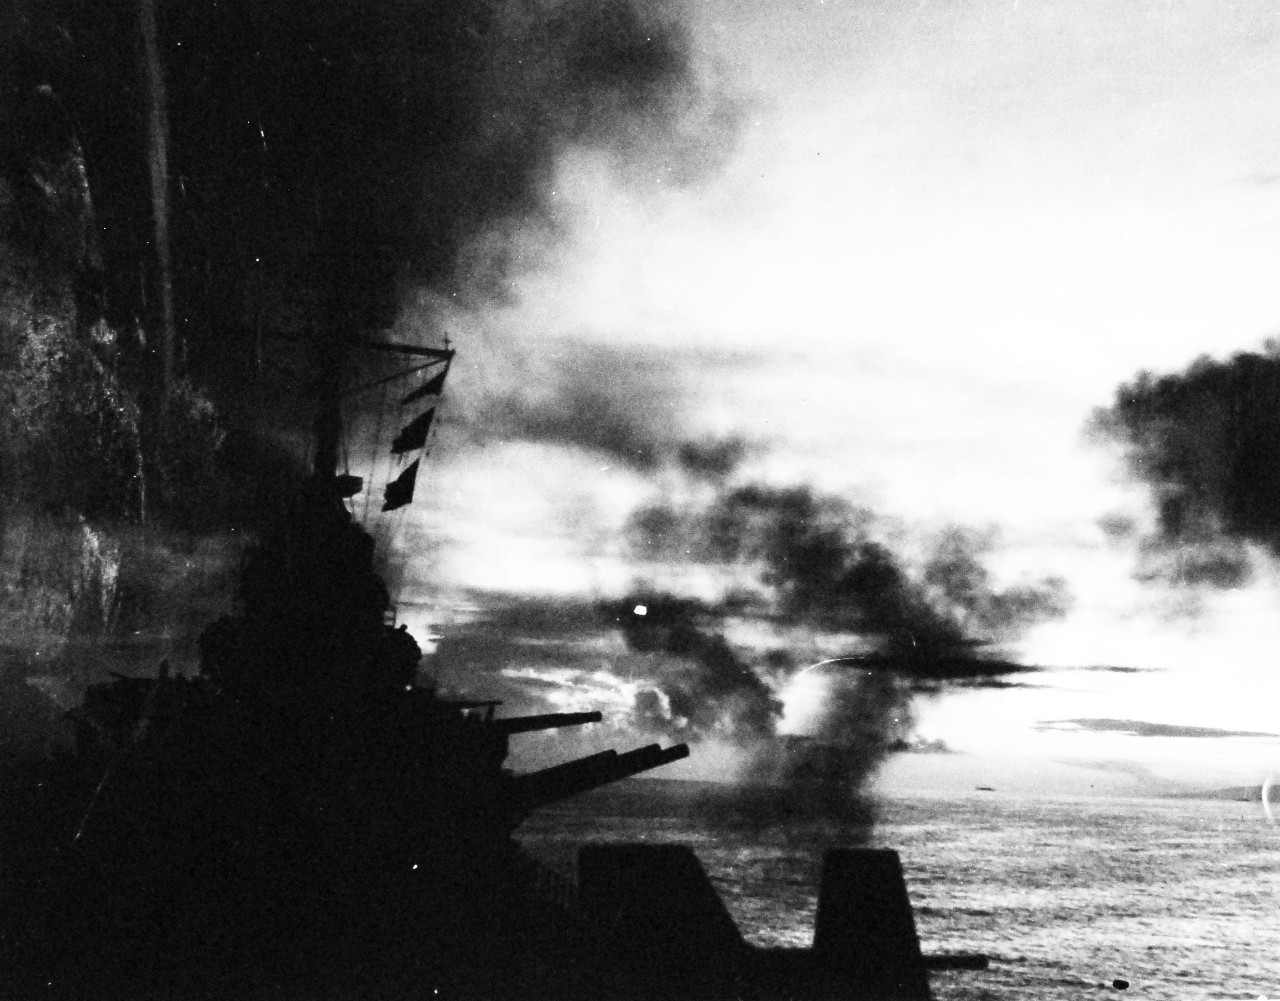 80-G-57444:  Battle of Cape Gloucester, New Britain, December 1943-January 1944.   Bombardment of Cape Gloucester, New Britain, by USS Phoenix (CL-46) and other ships of the Task Force.  Taken by USS Nashville (CL-43), December 24-26 1943. Official U.S. Navy Photograph, now in the collection of National Archives.   (2015/6/2). 